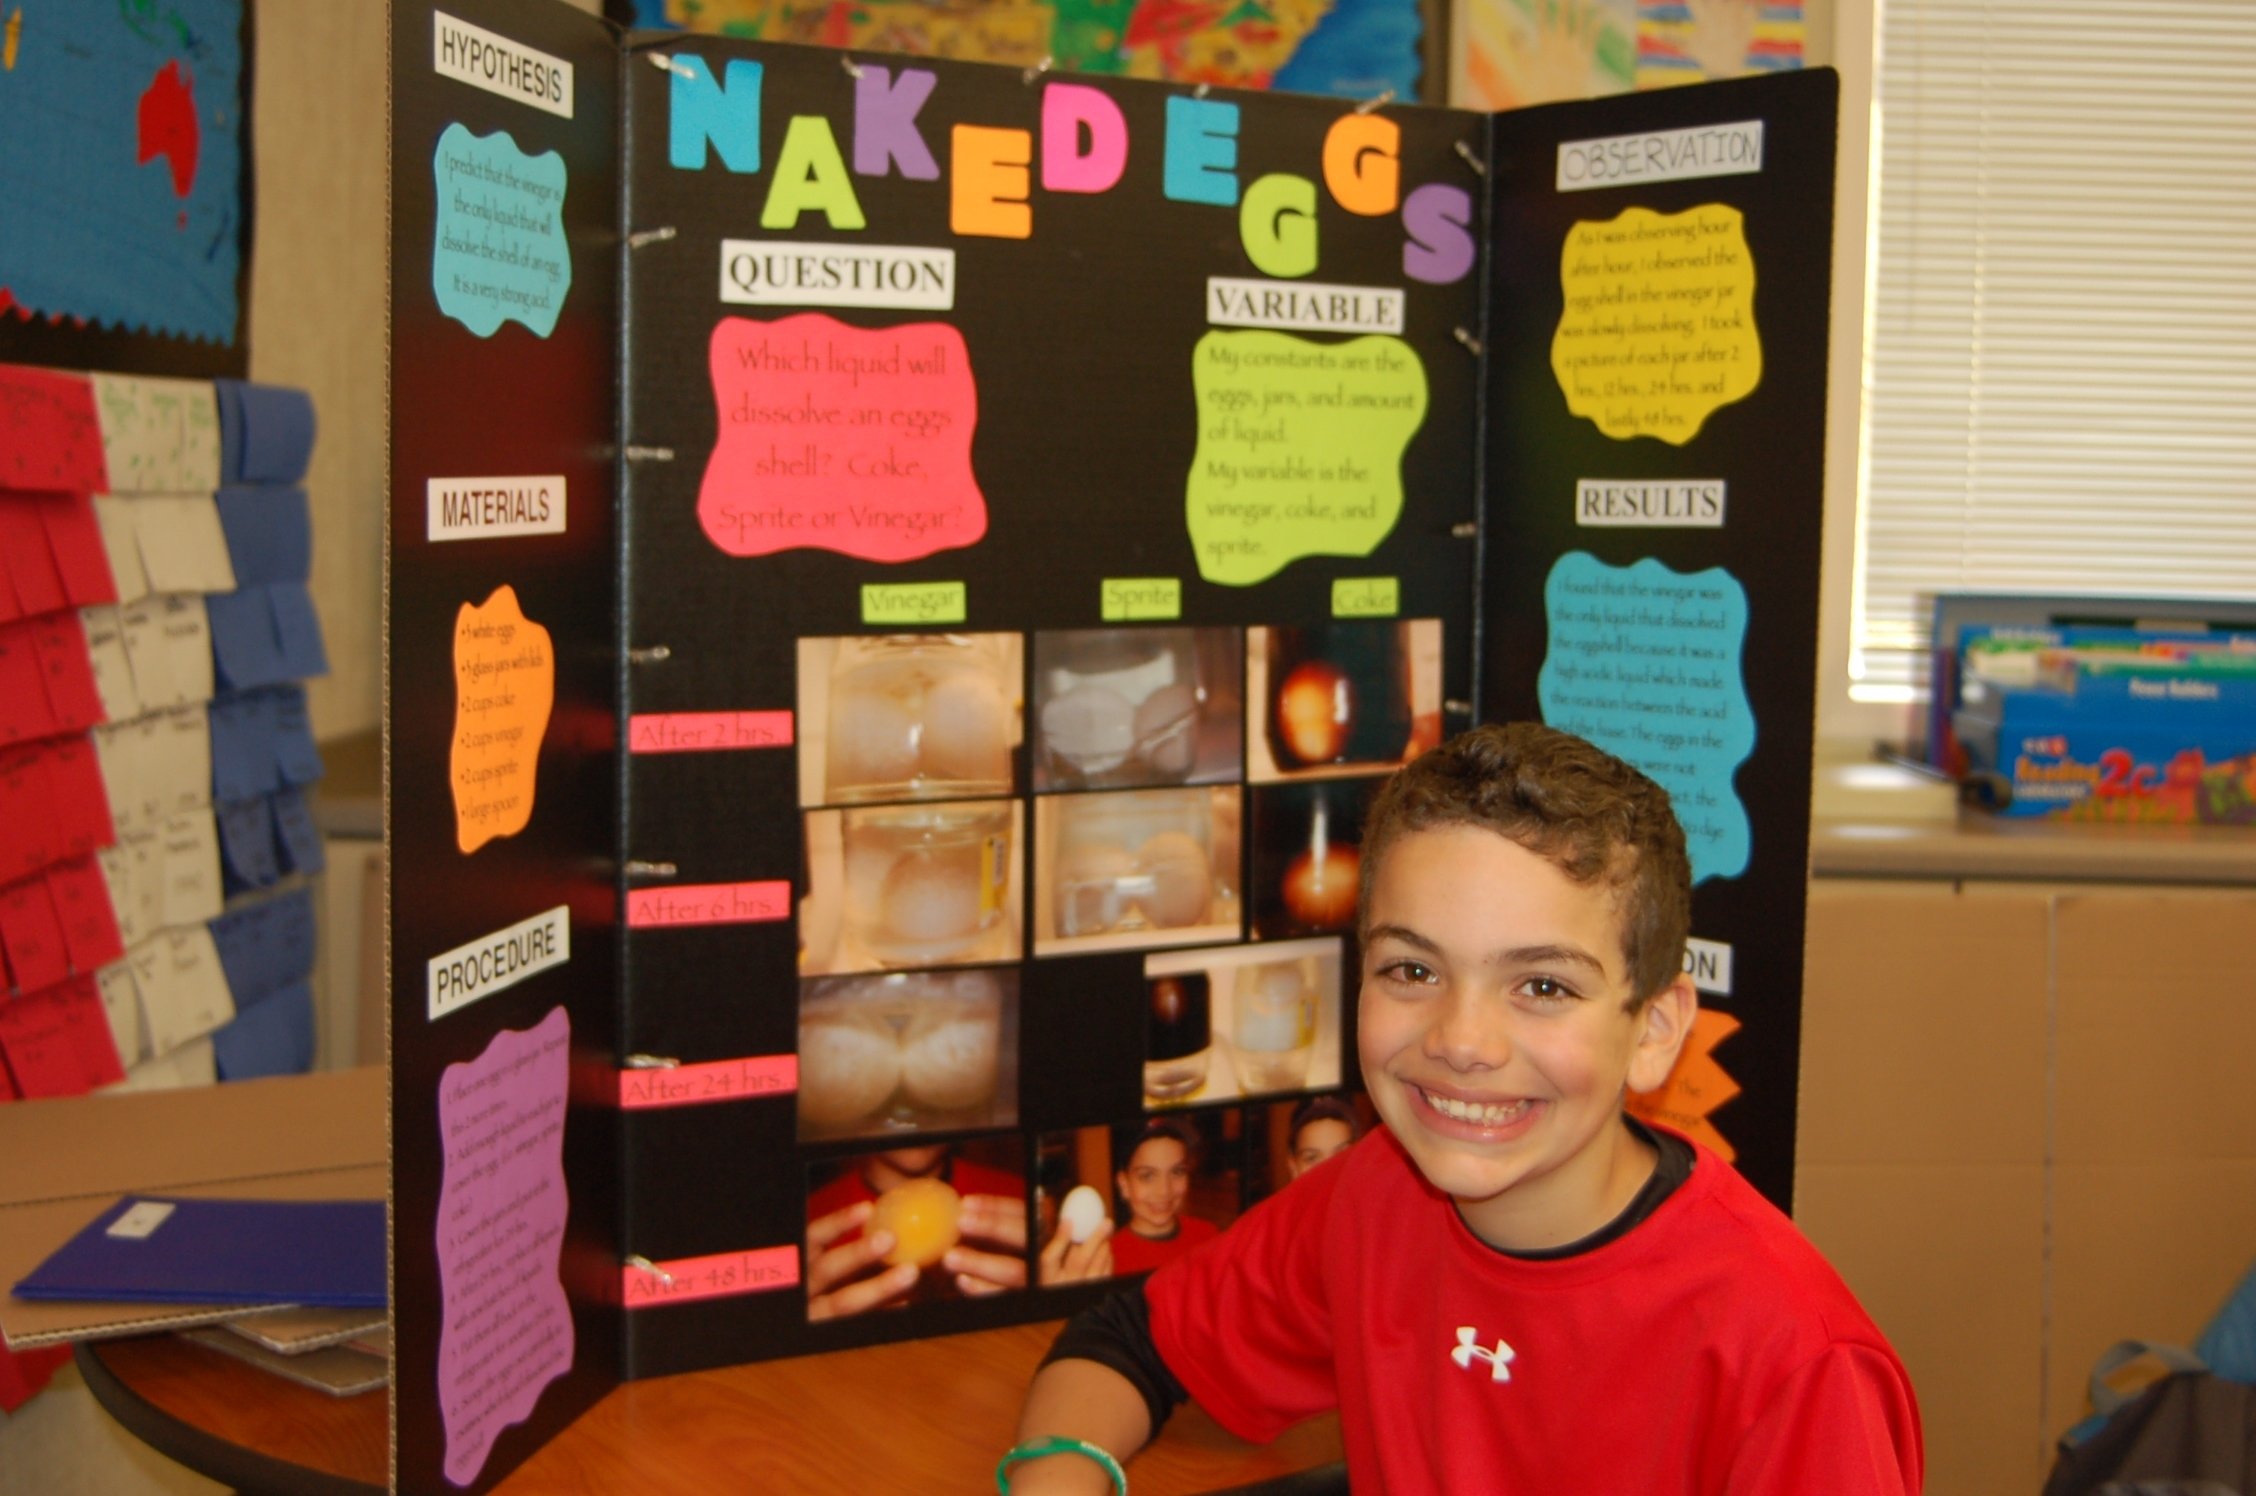 10 Pretty Elementary School Science Fair Project Ideas green elementary school science fair inspires student scientists 19 2022